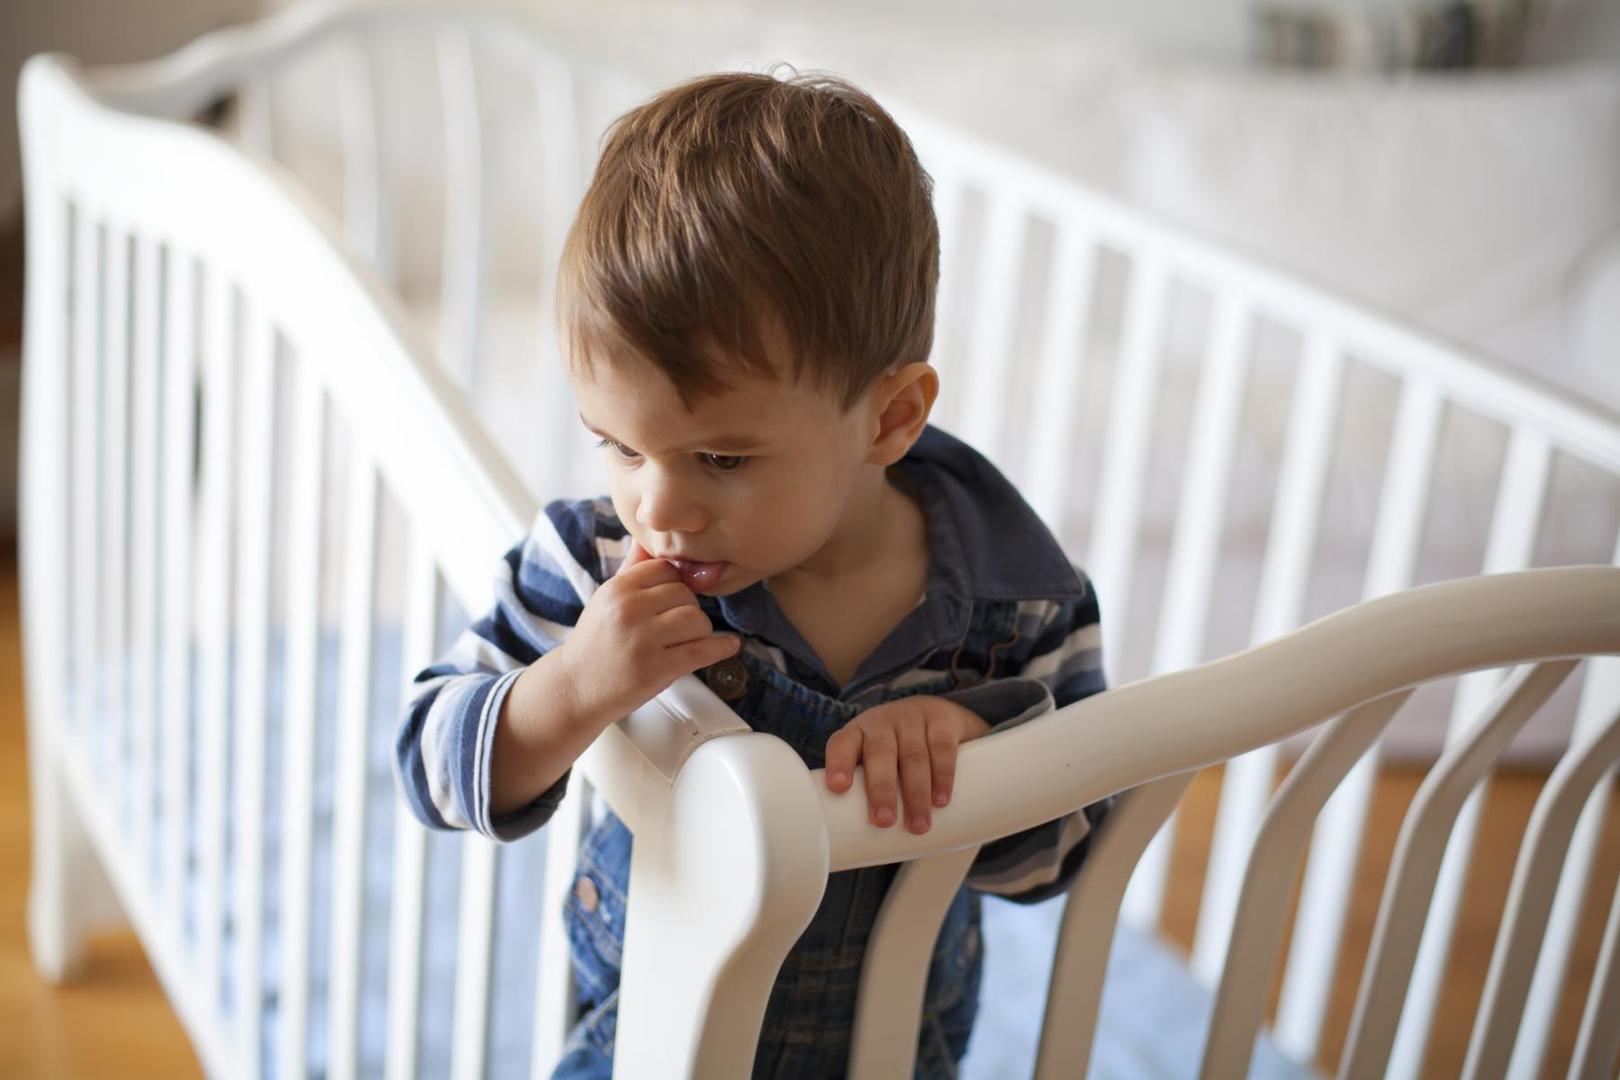 Toddlers may sleep better in cribs until age 3